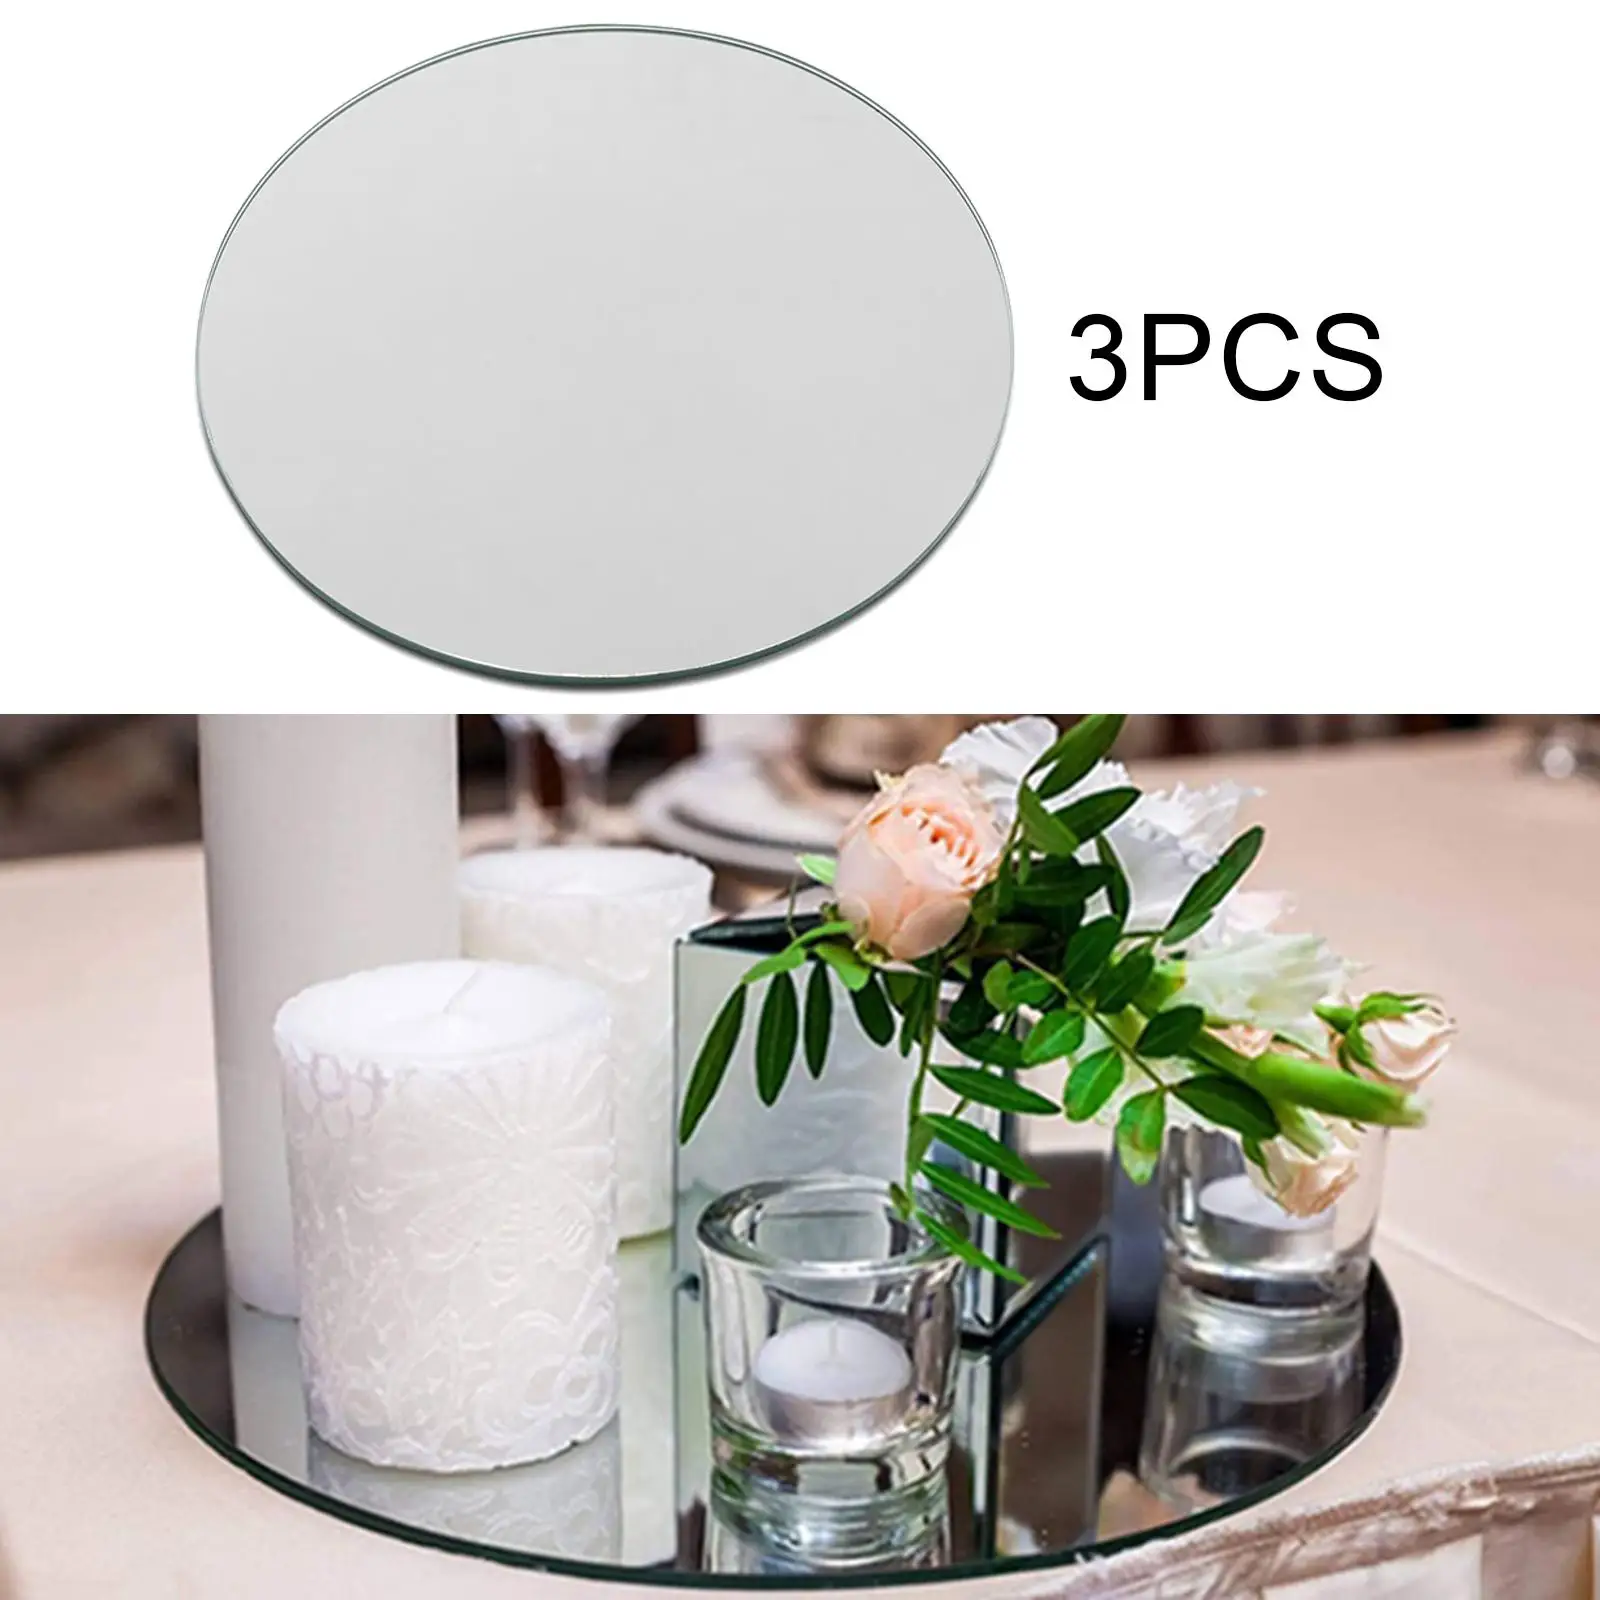 Acrylic Round Mirror Plate Candle Plate Organizer Pcs Decorative Mirror Trays for Wedding Party Table Ornament Dresser Home 